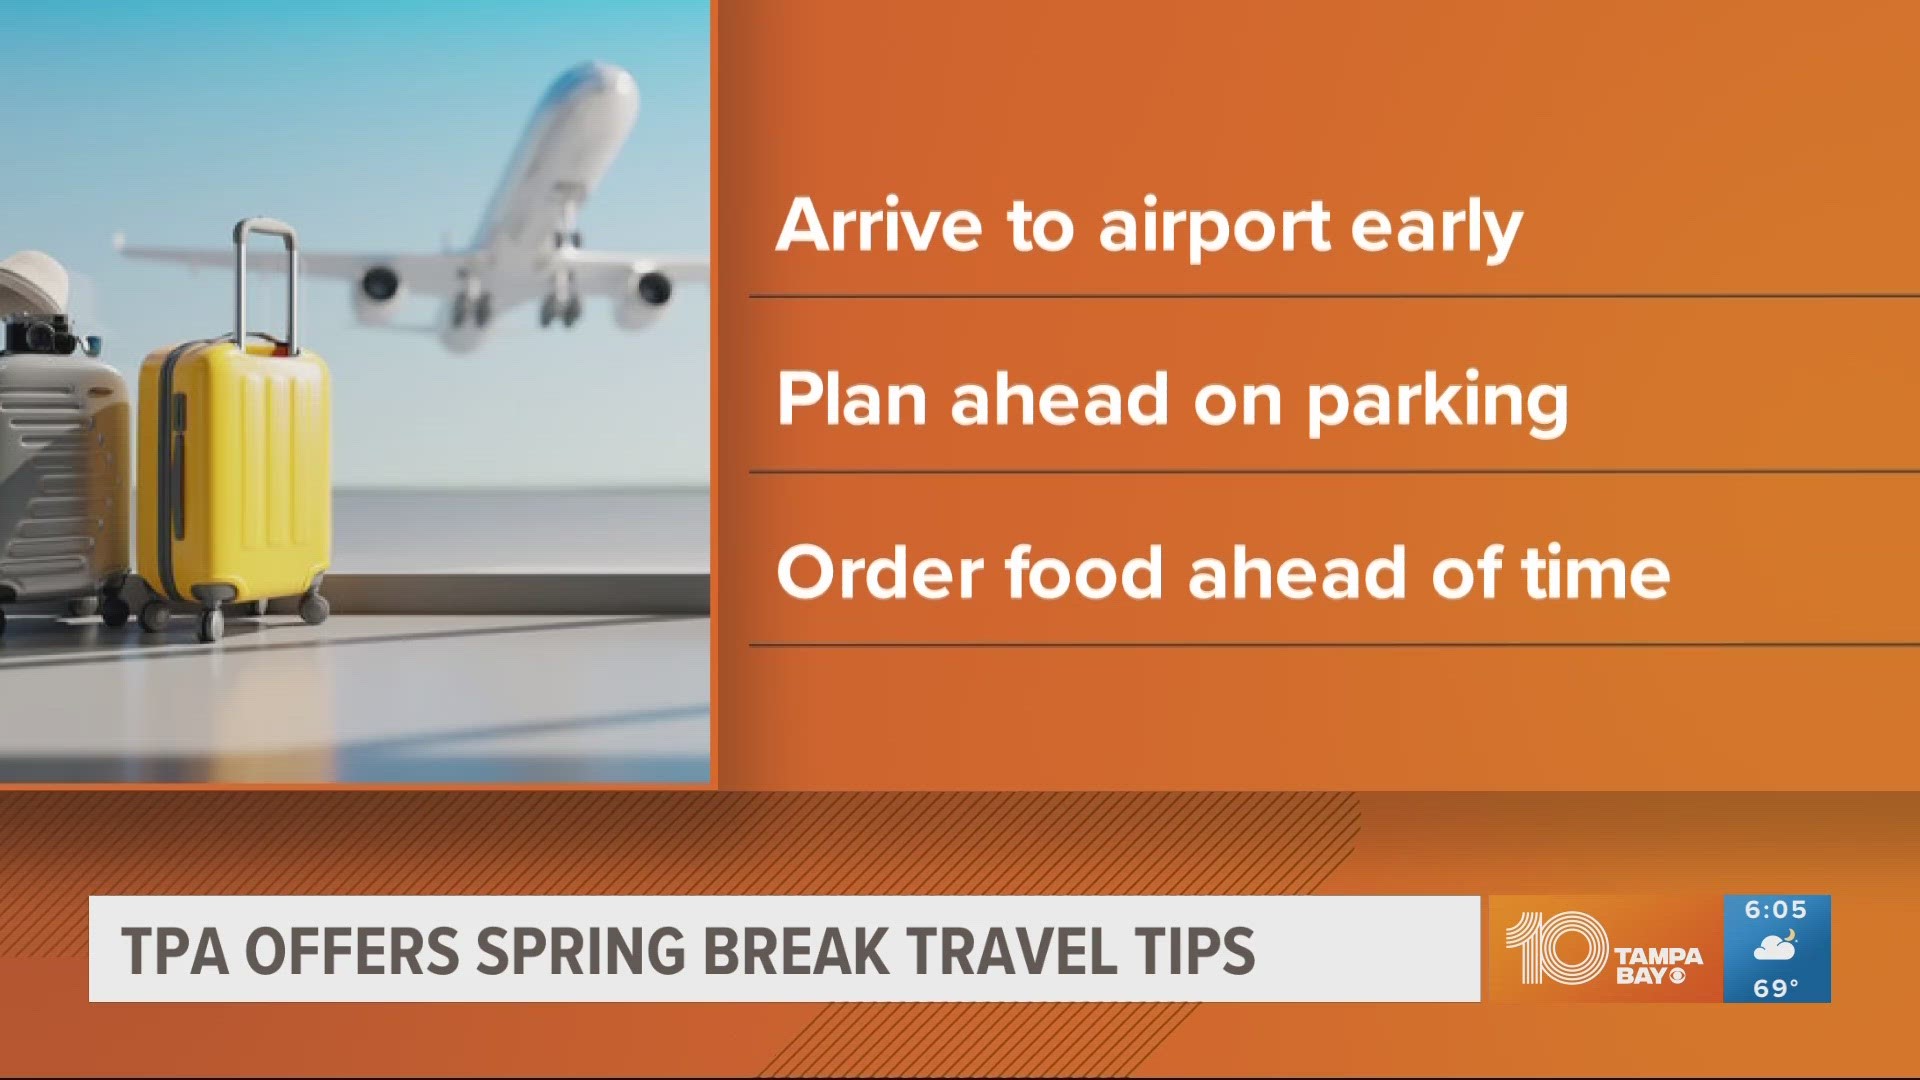 Travelers can now order ahead food, drinks and other items from 18 restaurants and four retailers at the airport.